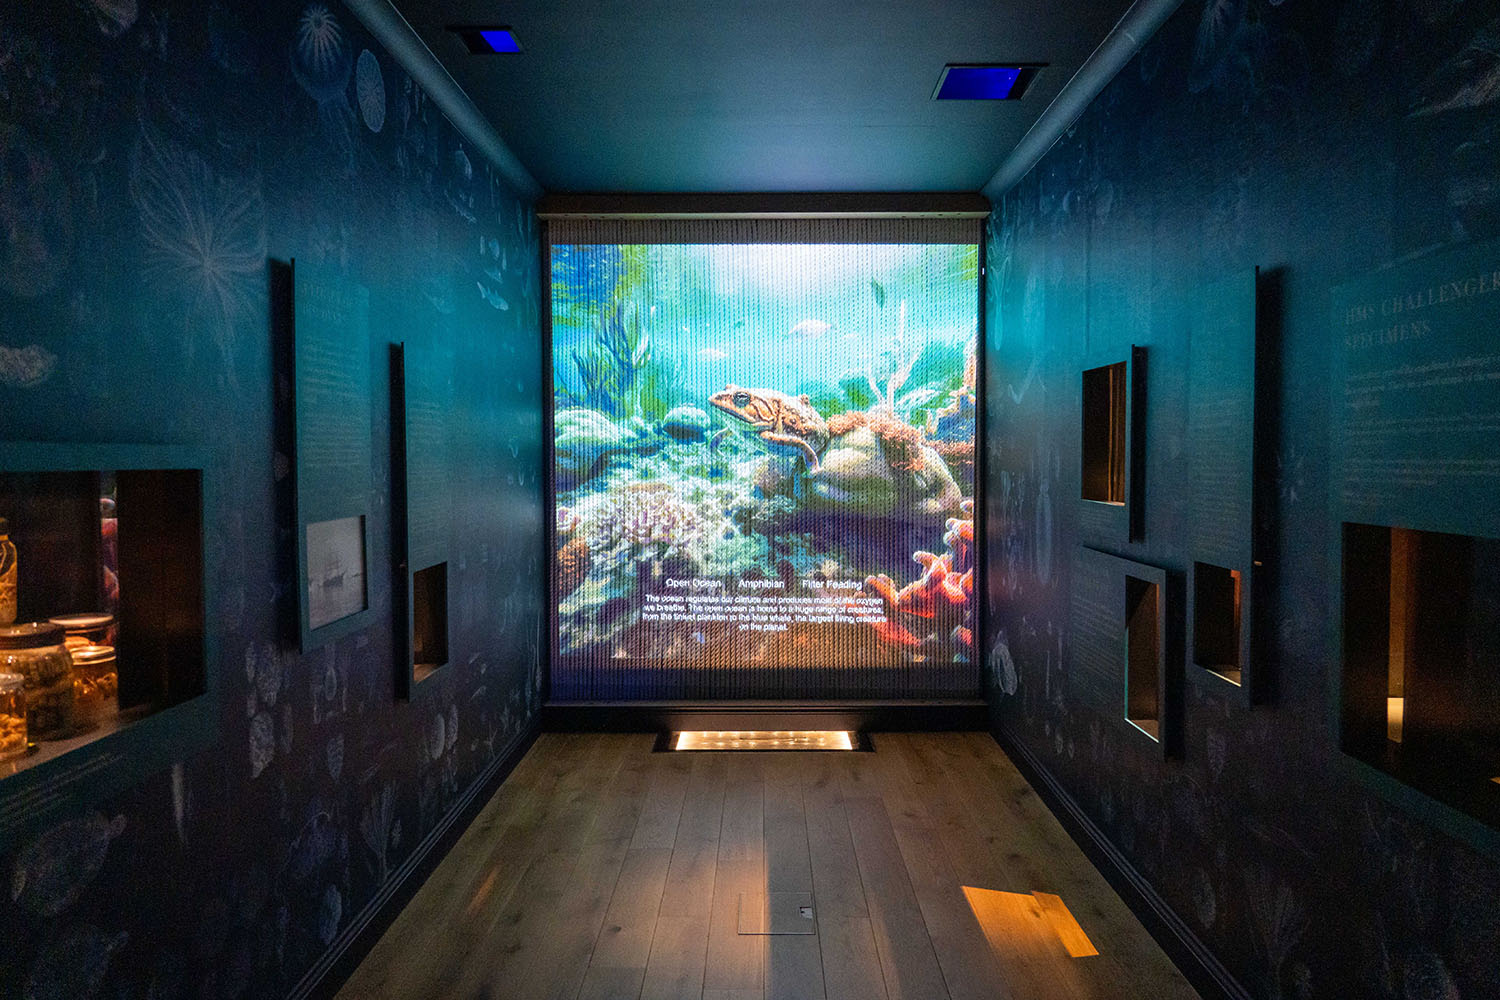 the output of the interactive is projected on a rope wall.